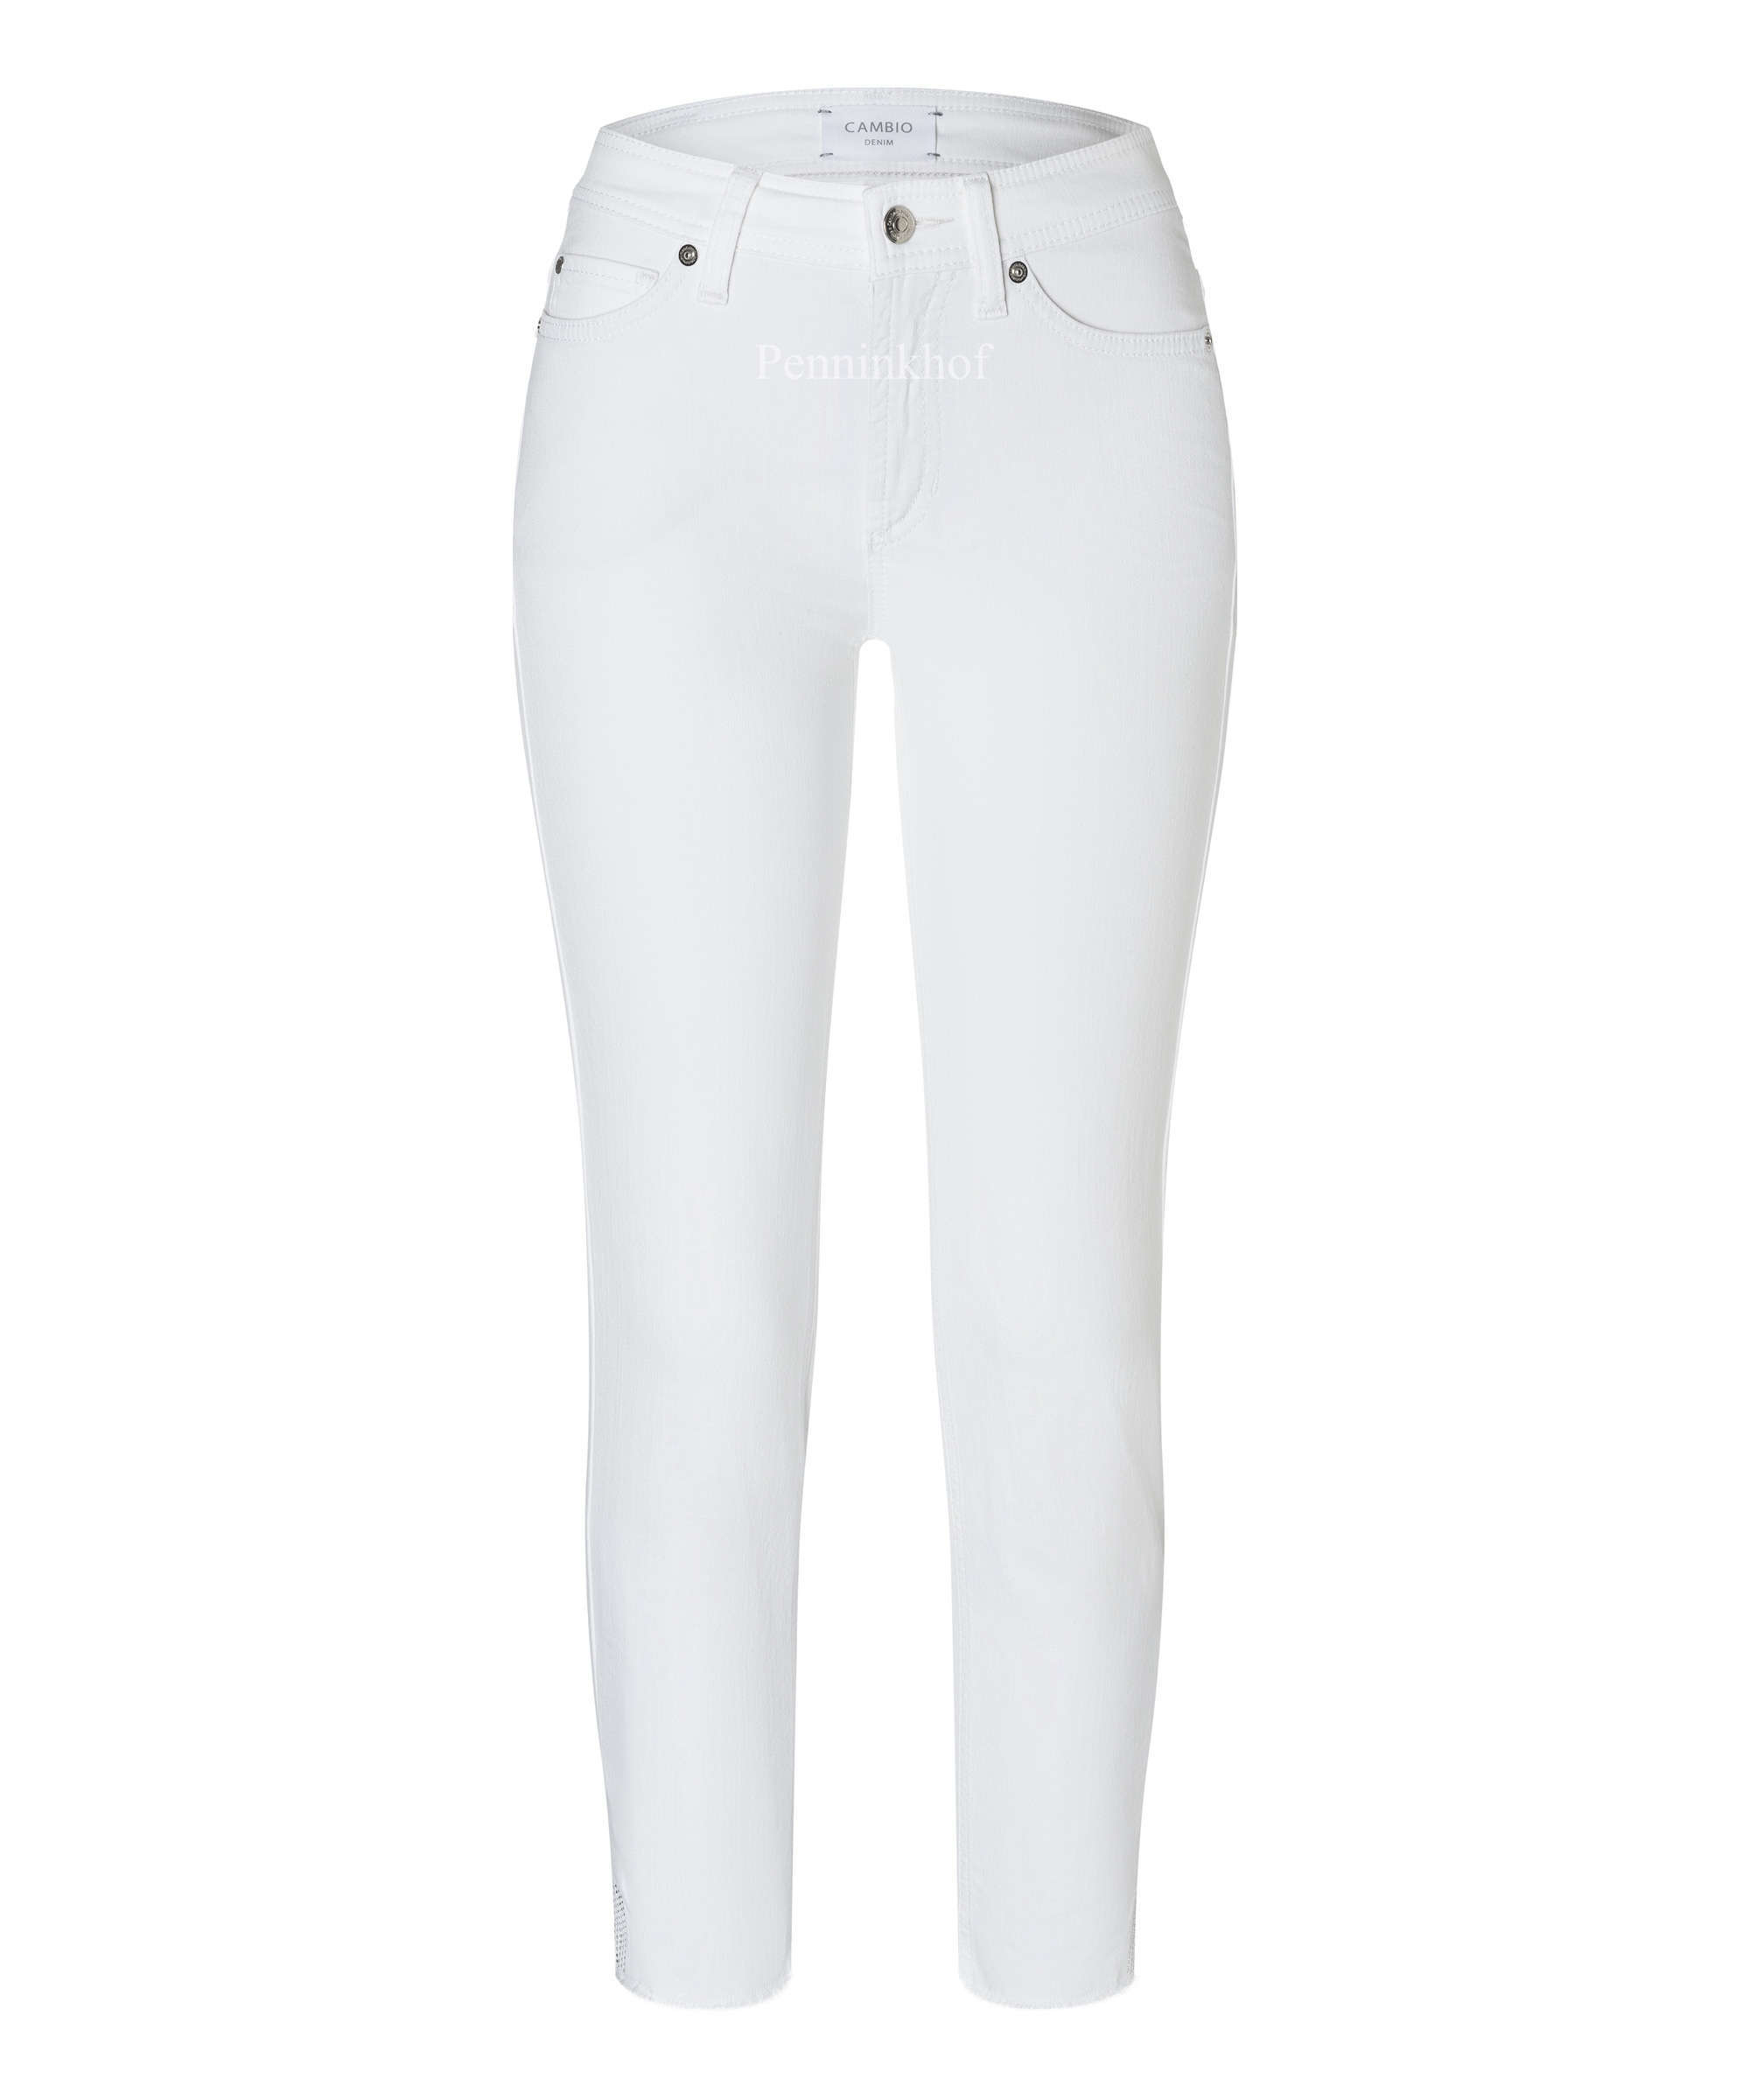 Cambio trousers PIPER 9048 0038-39 White by Penninkhoffashion.com